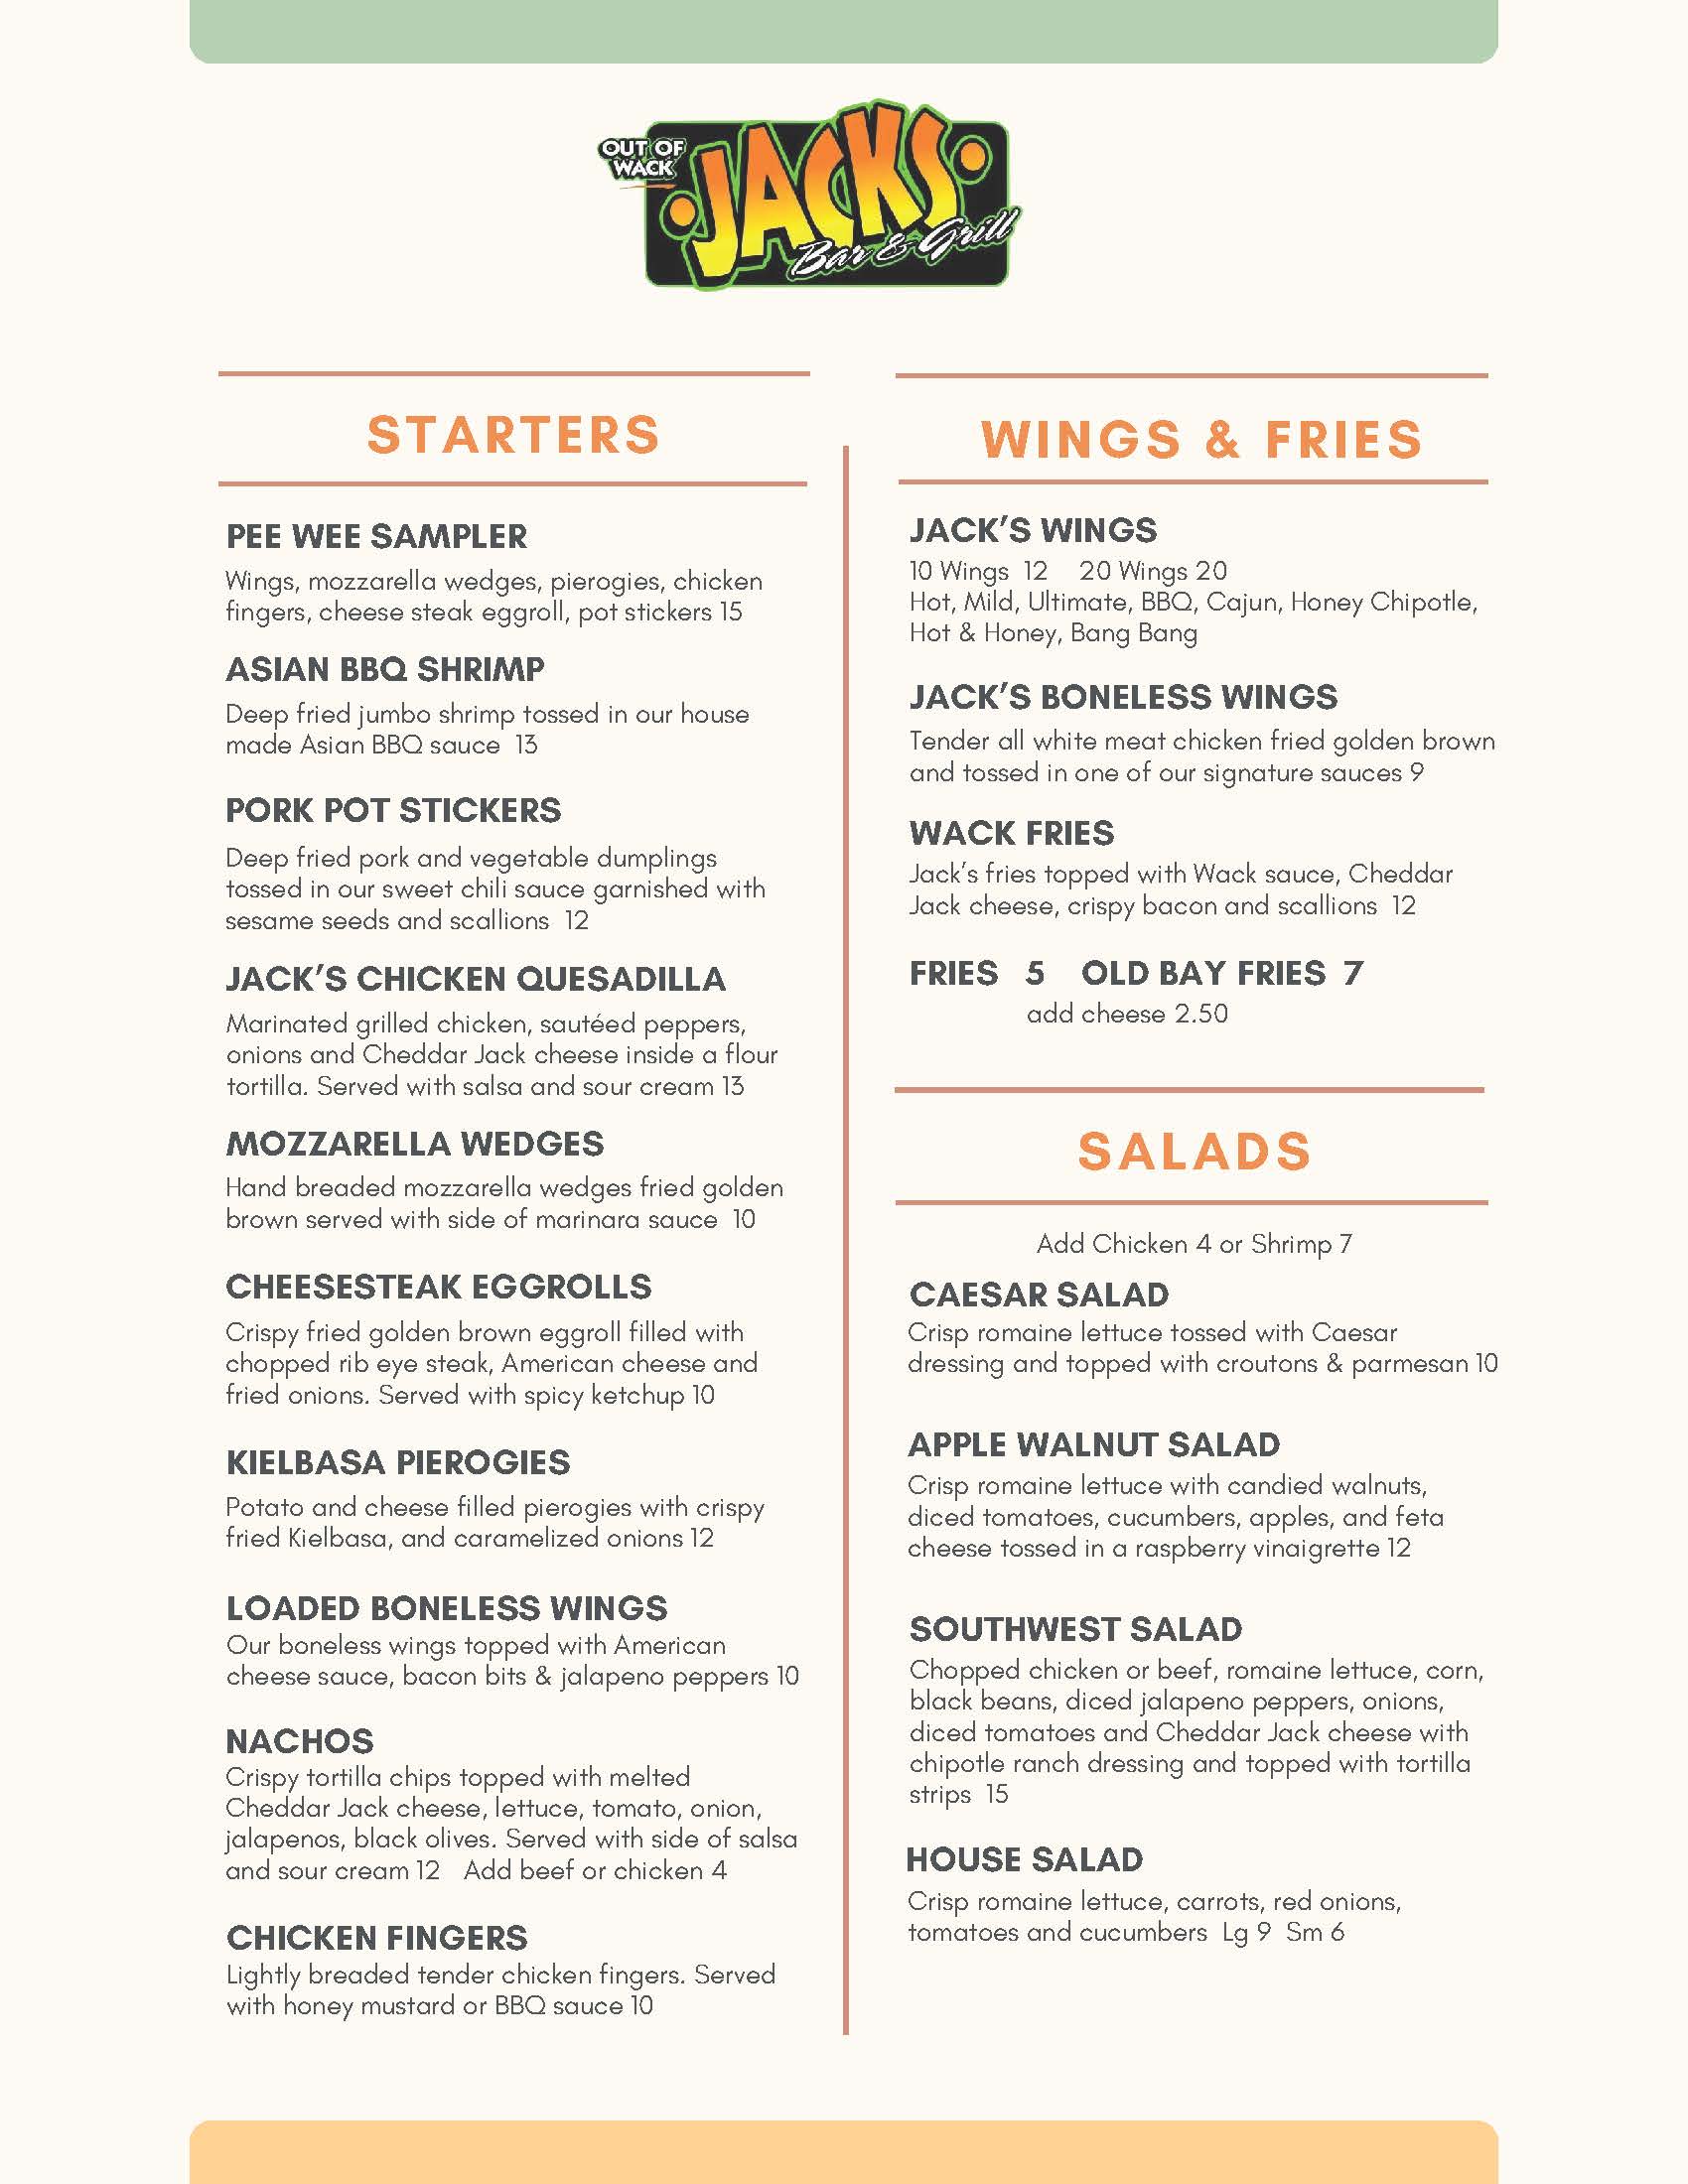 A menu for a restaurant with an orange and green color scheme.